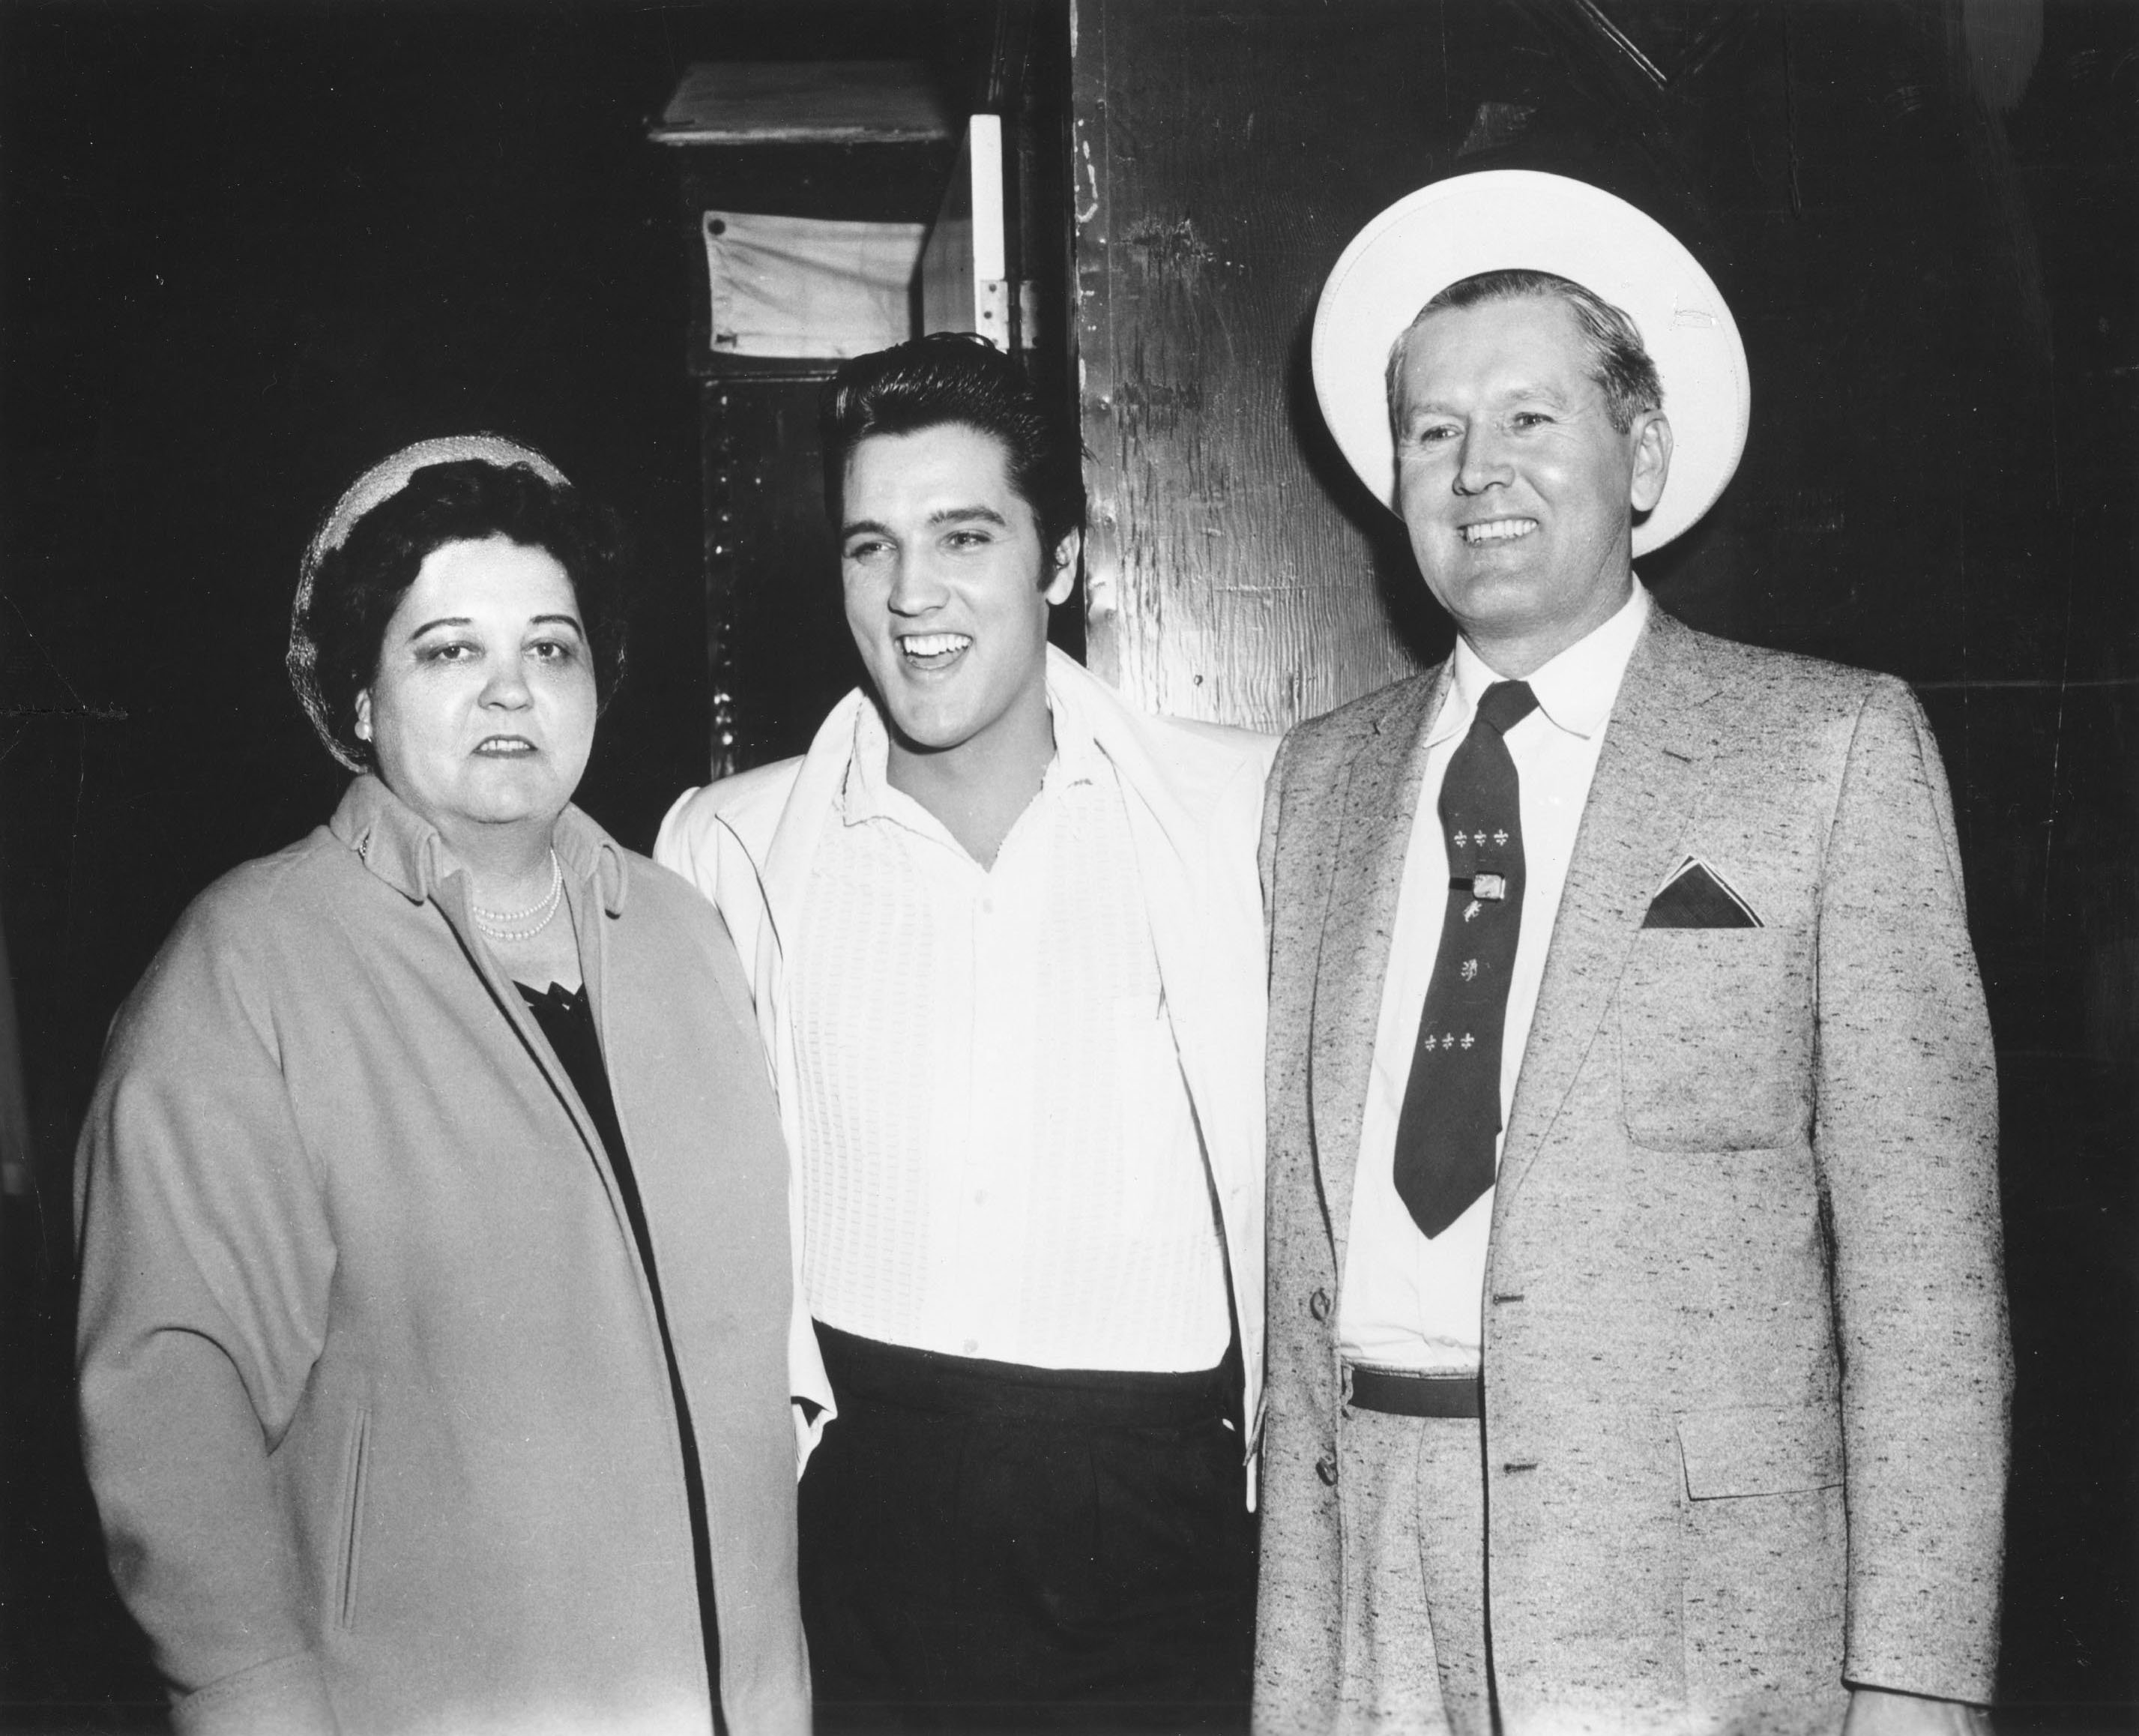 Elvis Presley and his parents, all of whom have a multicultural ethnicity.